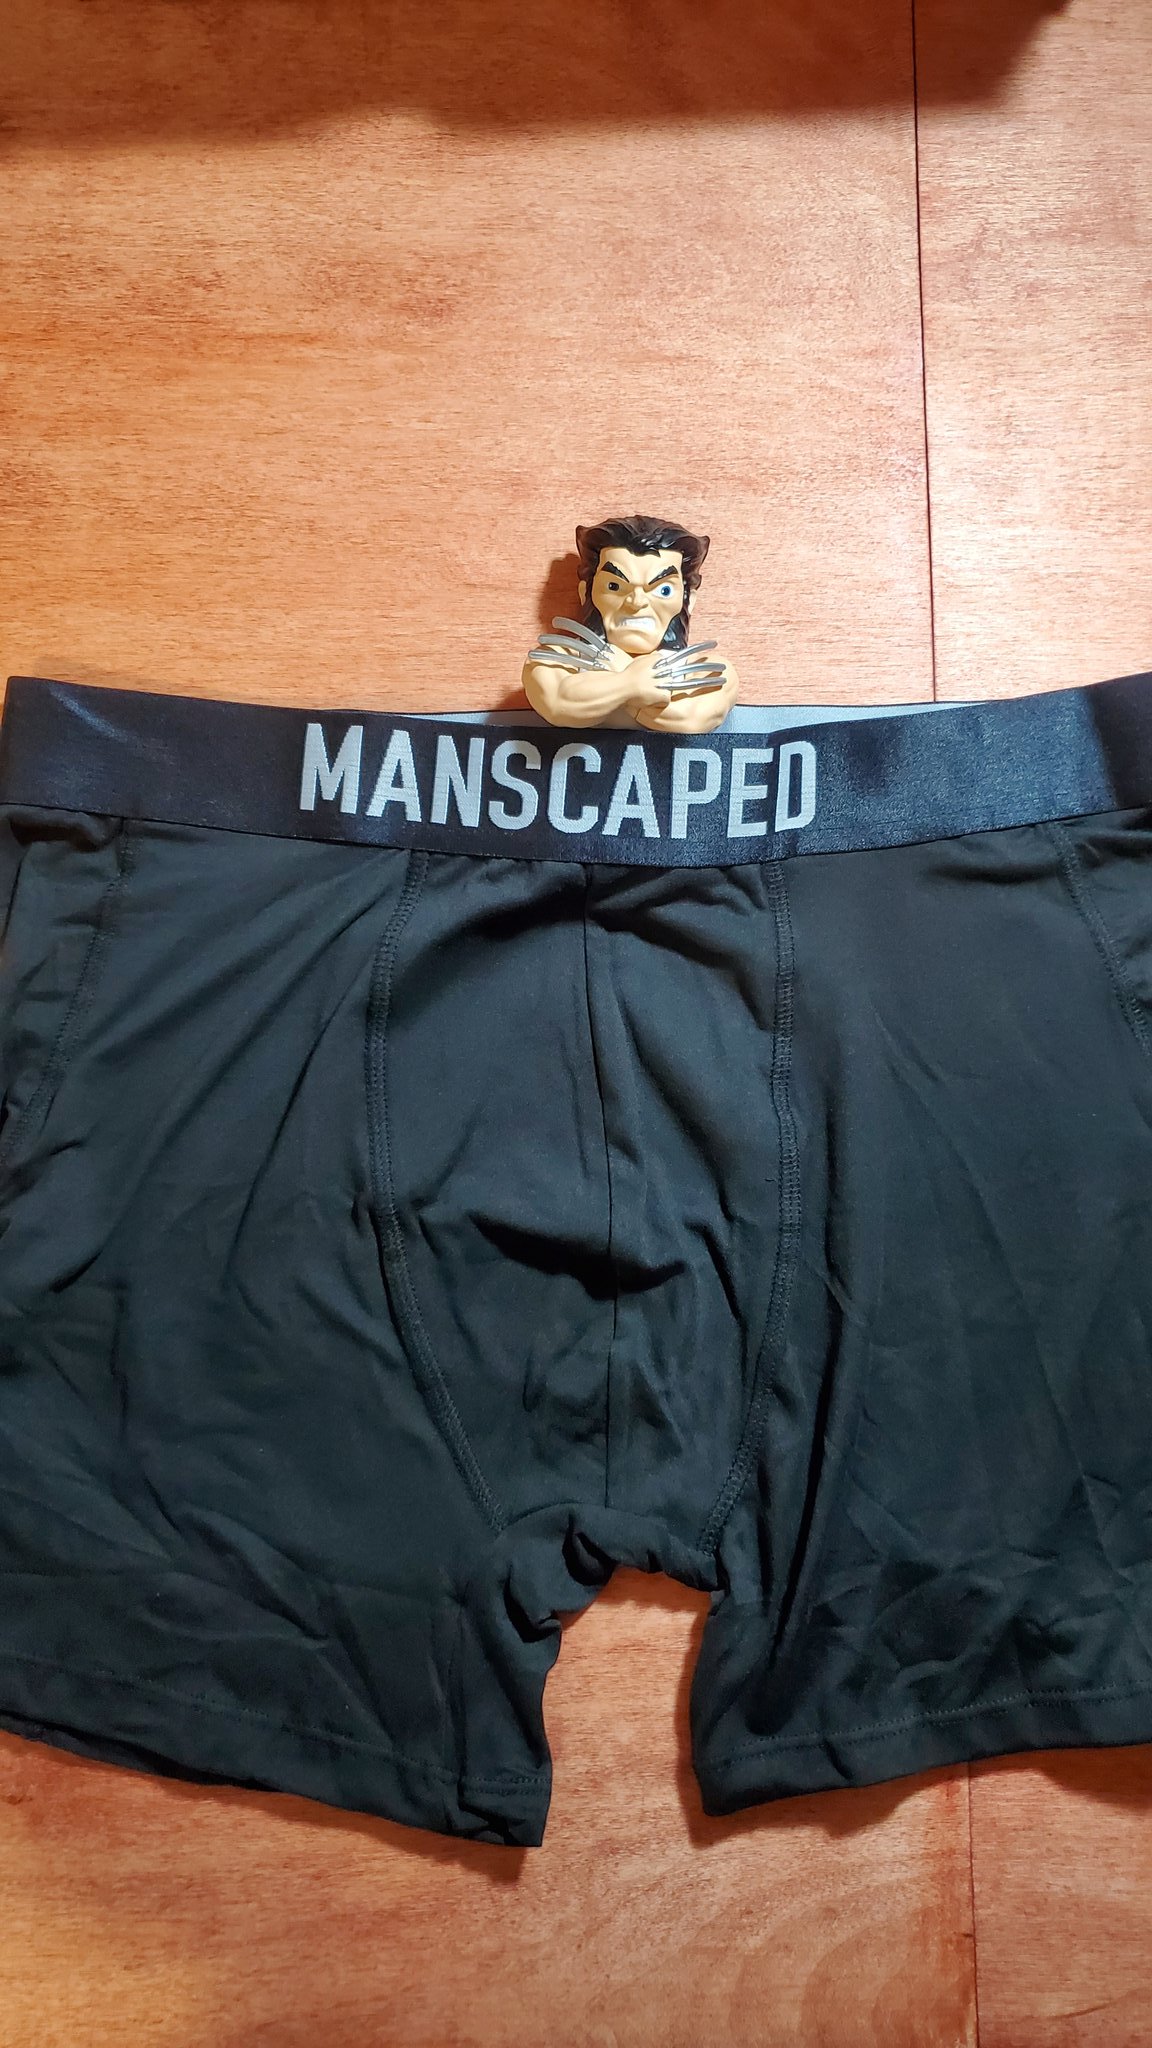 Adrian Ruiz on X: Manscaped Boxers! Anti-chafing cooling boxer